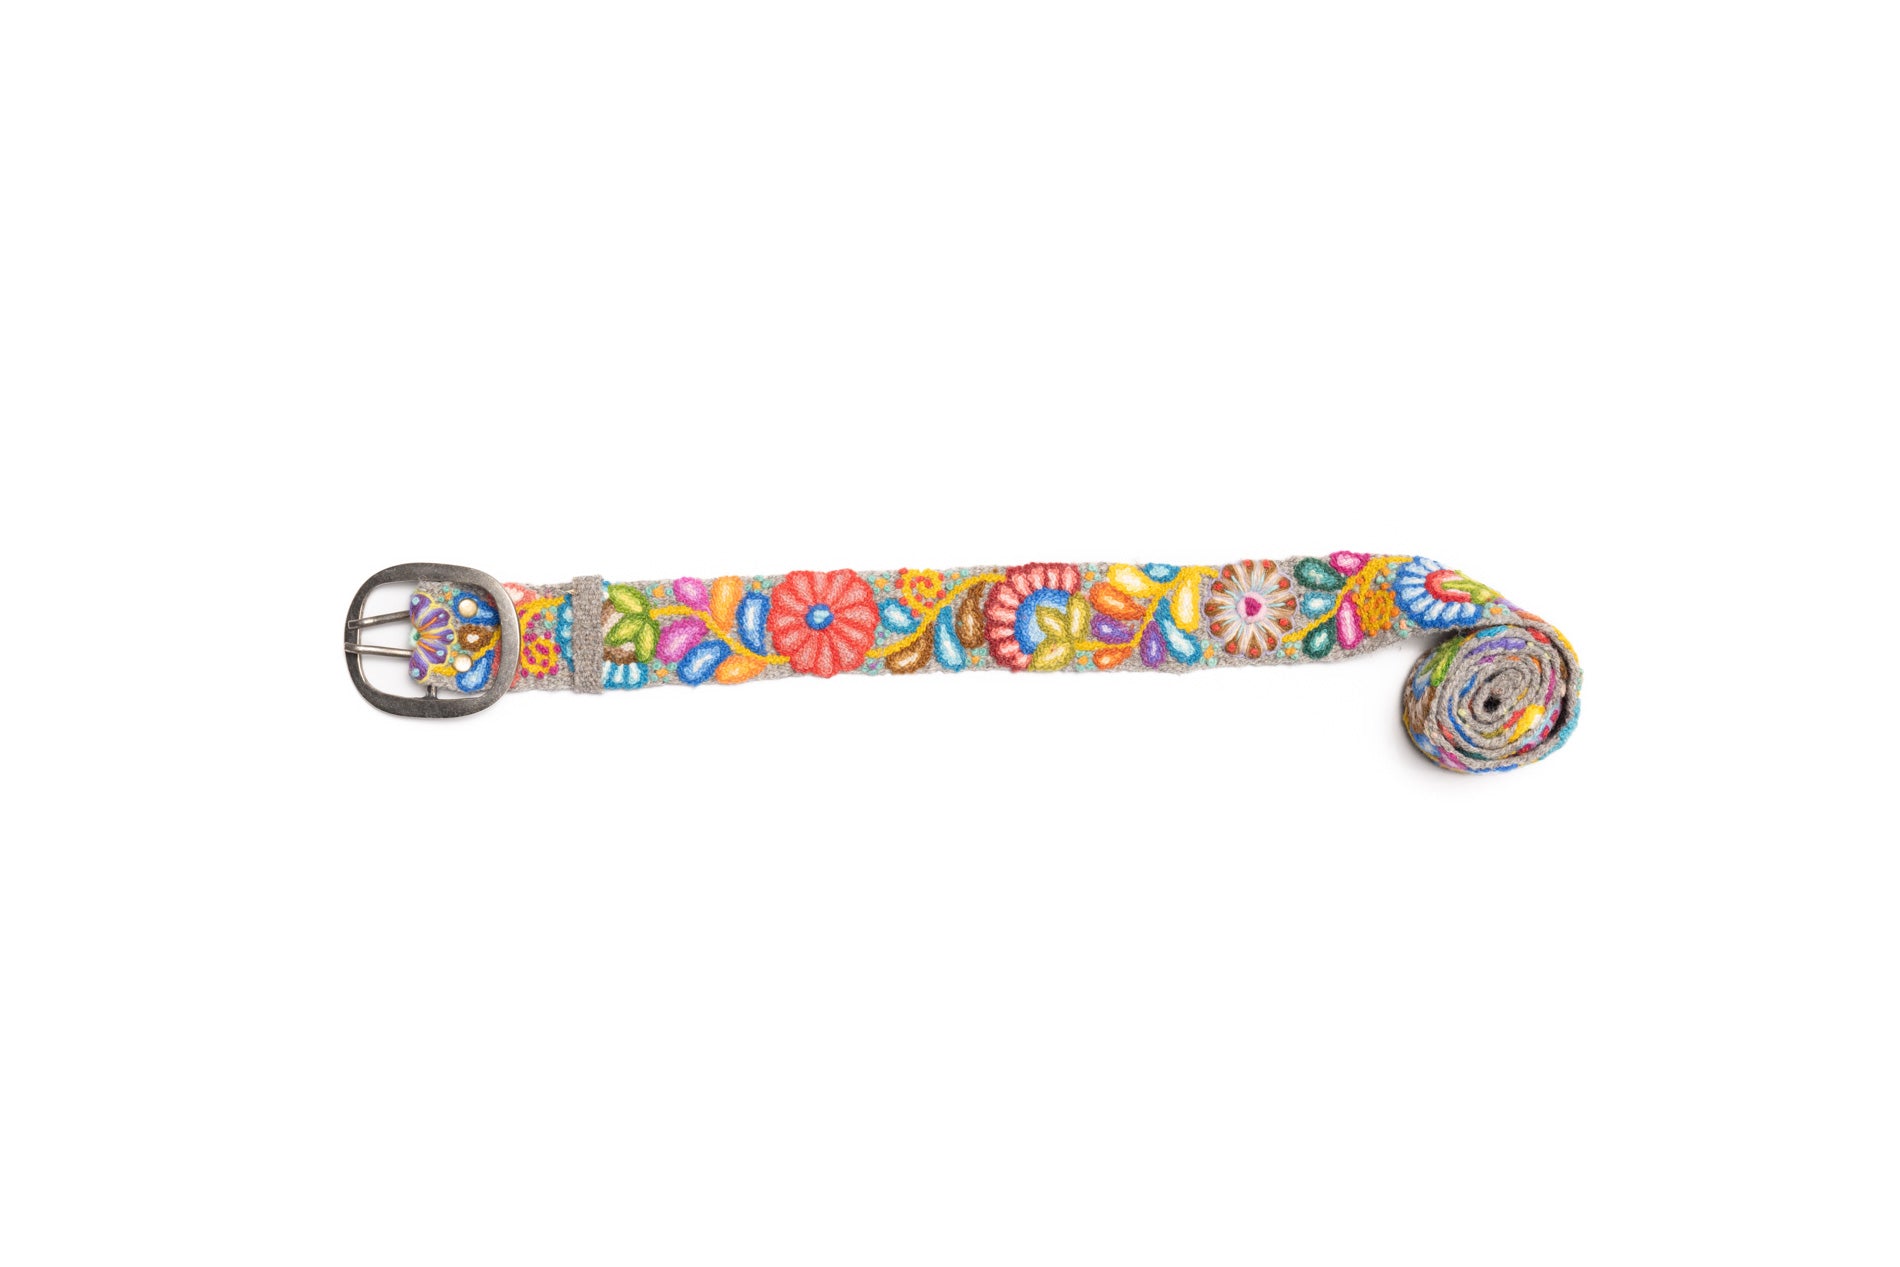 Bright Embroidered Belt with Colorful Florals